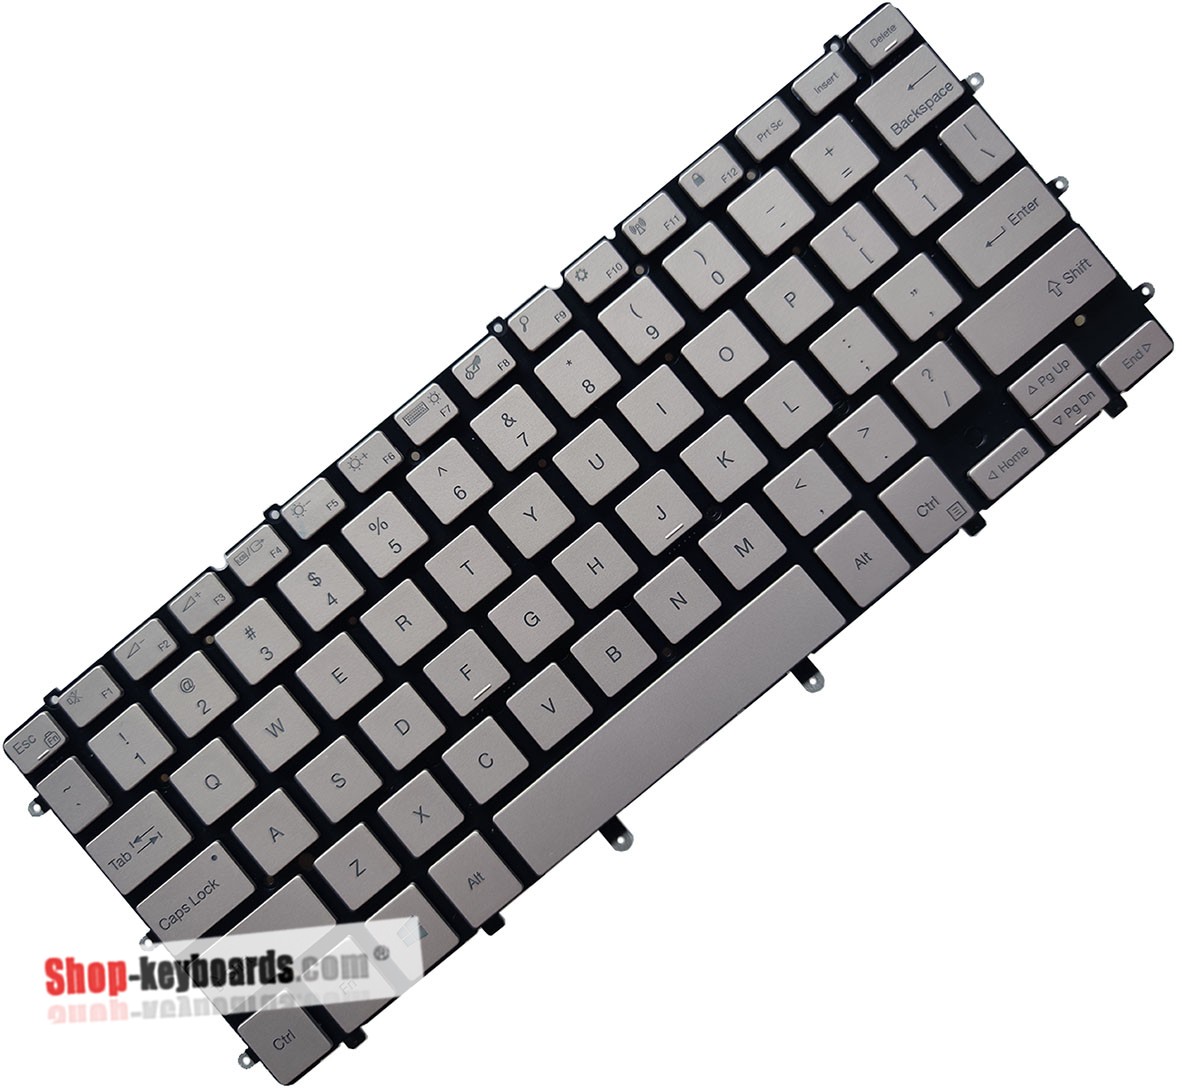 QUANTA AETX7F00020 Keyboard replacement